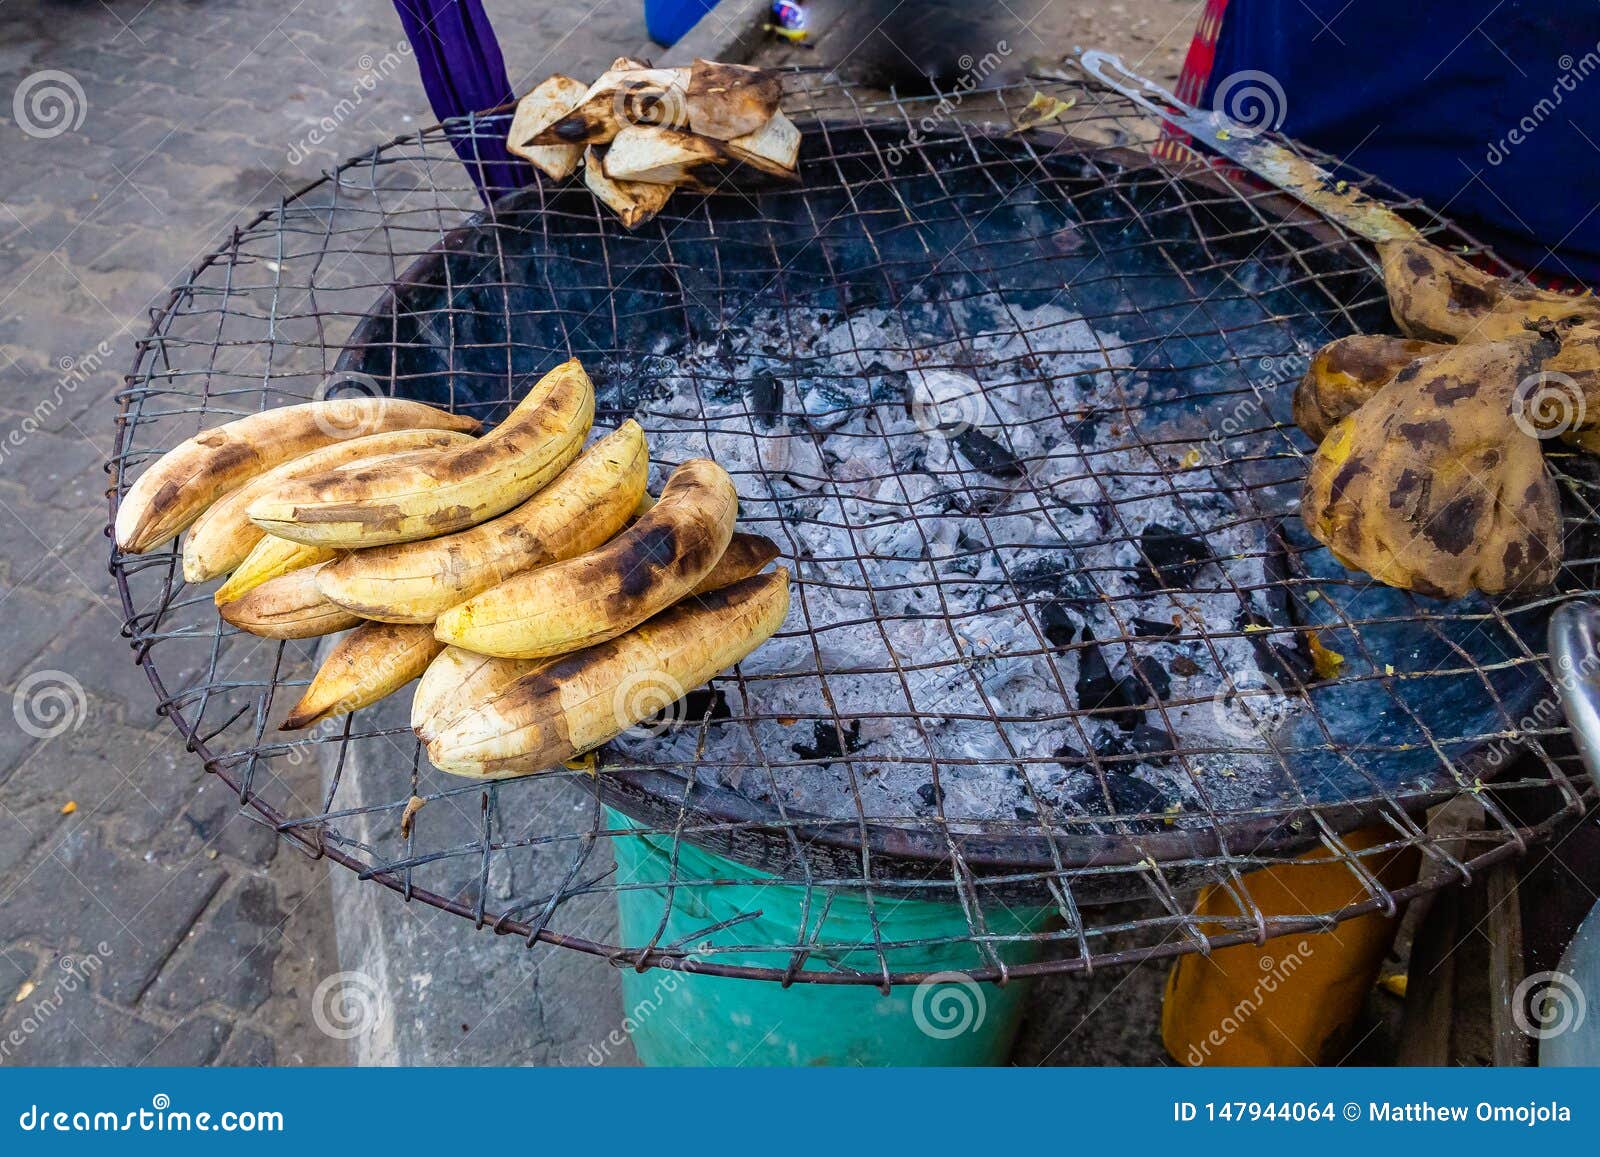 street foods in lagos nigeria; roadside charcoal grill with roasted  yam, plantain and sweet potato